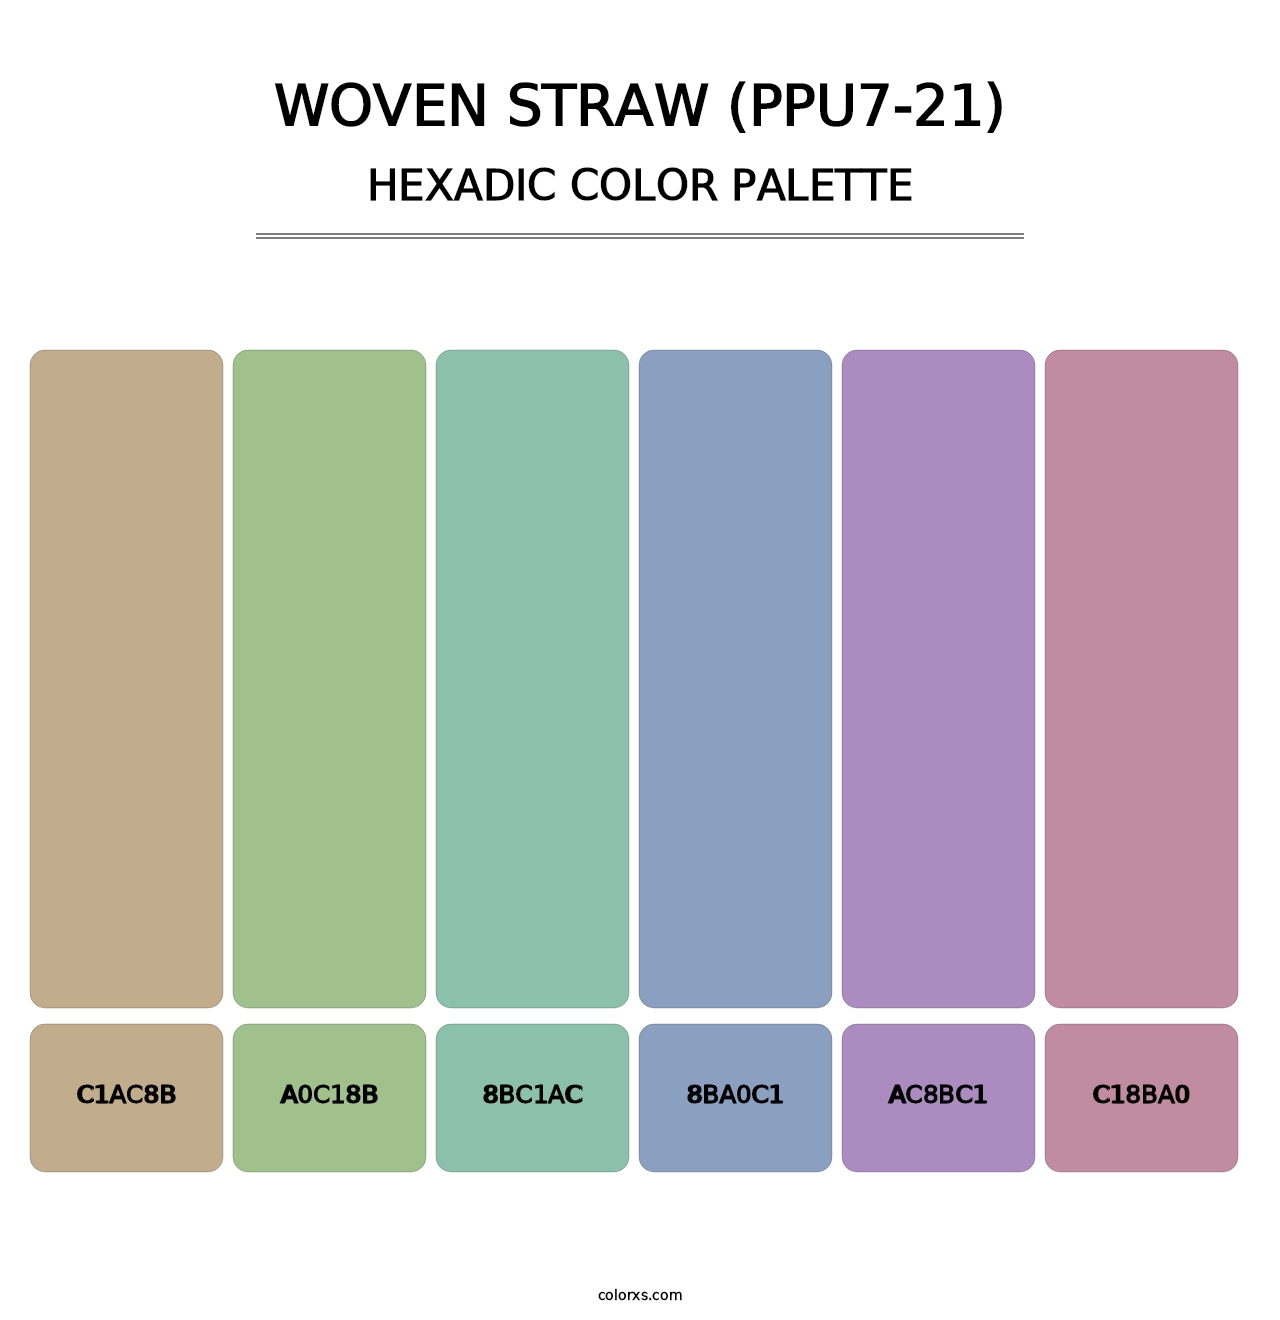 Woven Straw (PPU7-21) - Hexadic Color Palette